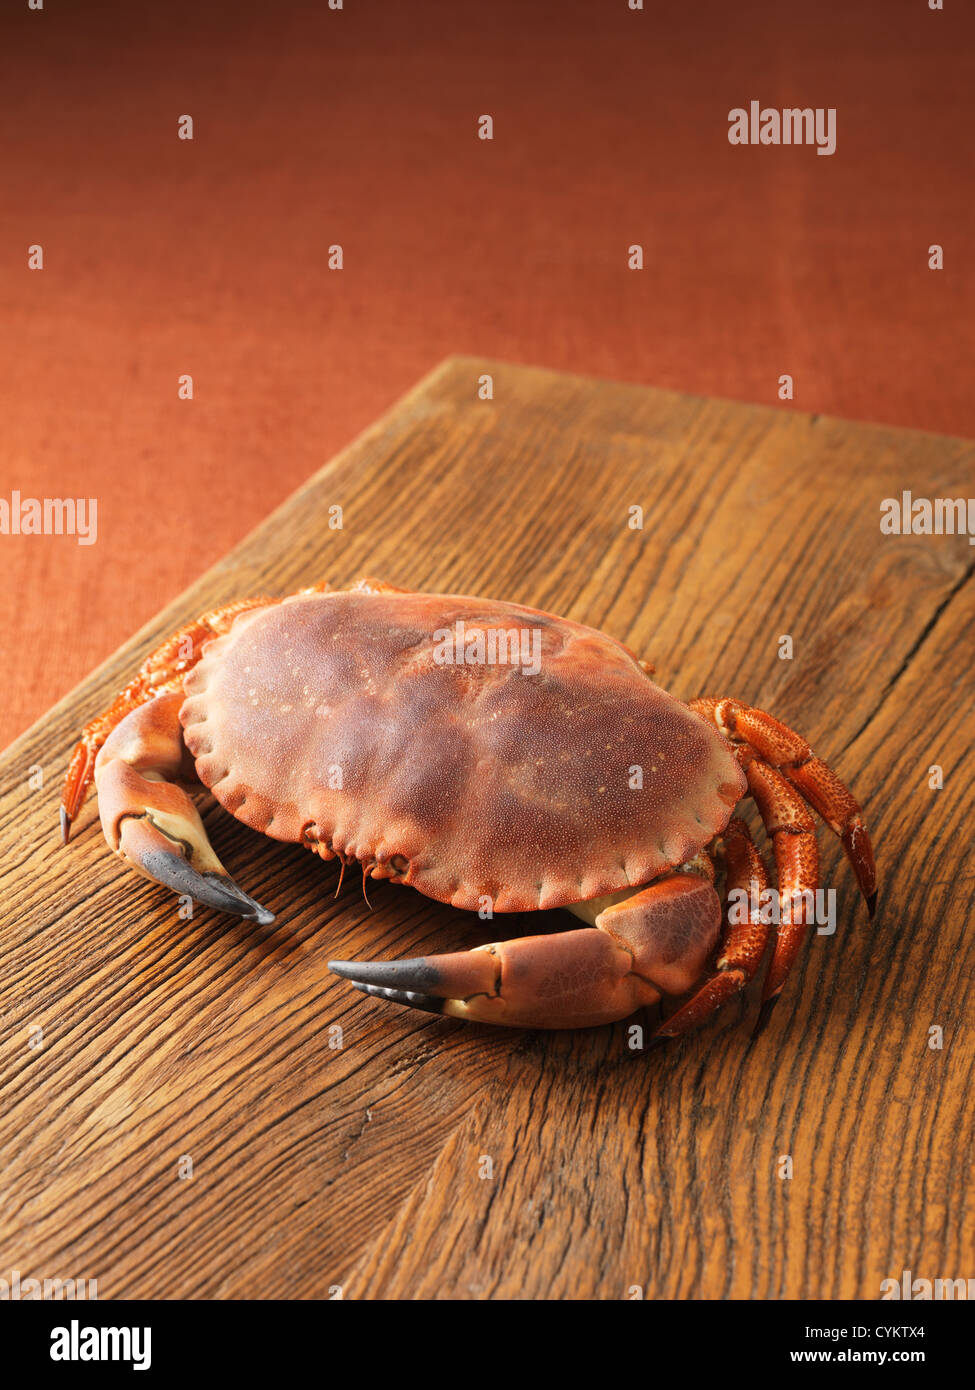 Whole crab on wooden board Stock Photo